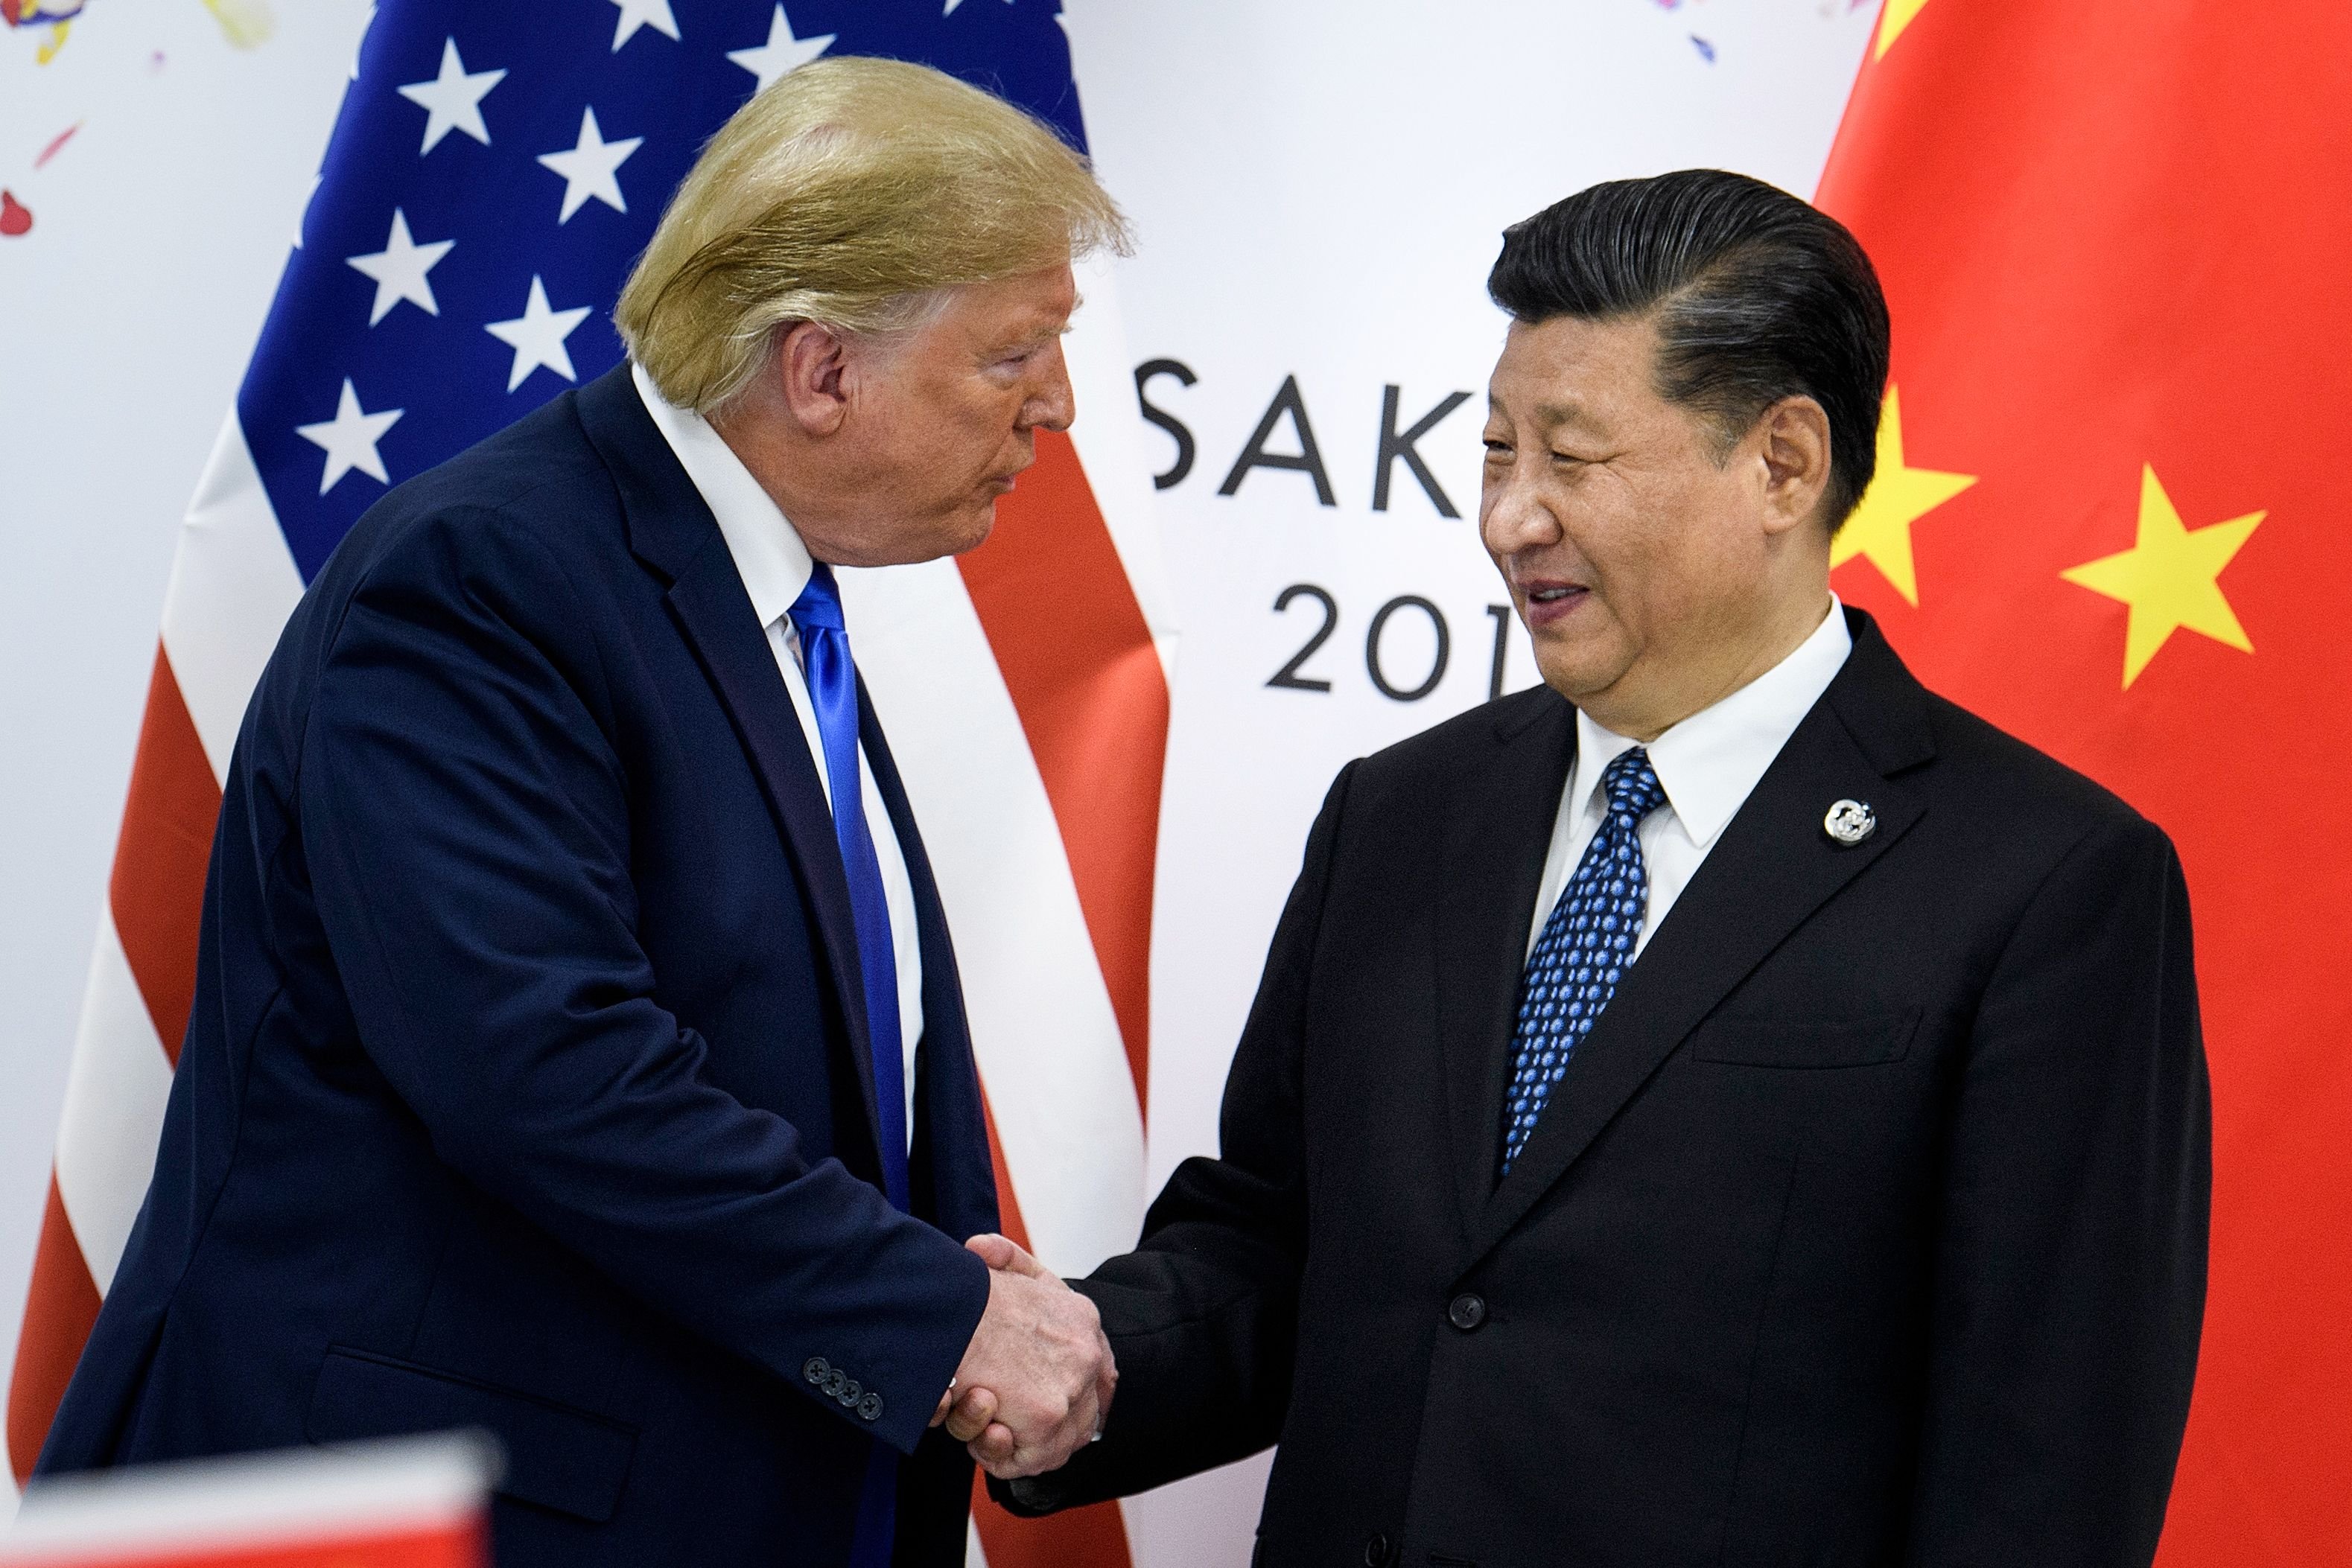 June 28, 2019 -- China's President Xi Jinping (R) shakes hands with US President Donald Trump before a bilateral meeting on the sidelines of the G20 Summit in Osaka. - From the Arab Spring to bloodletting in Syria, from Obama to Trump, from terror in the streets of Paris to Brexit, the 2010s began with hope for a more equitable world, and end with a slide towards nationalistic populism. (Photo by BRENDAN SMIALOWSKI/AFP via Getty Images)